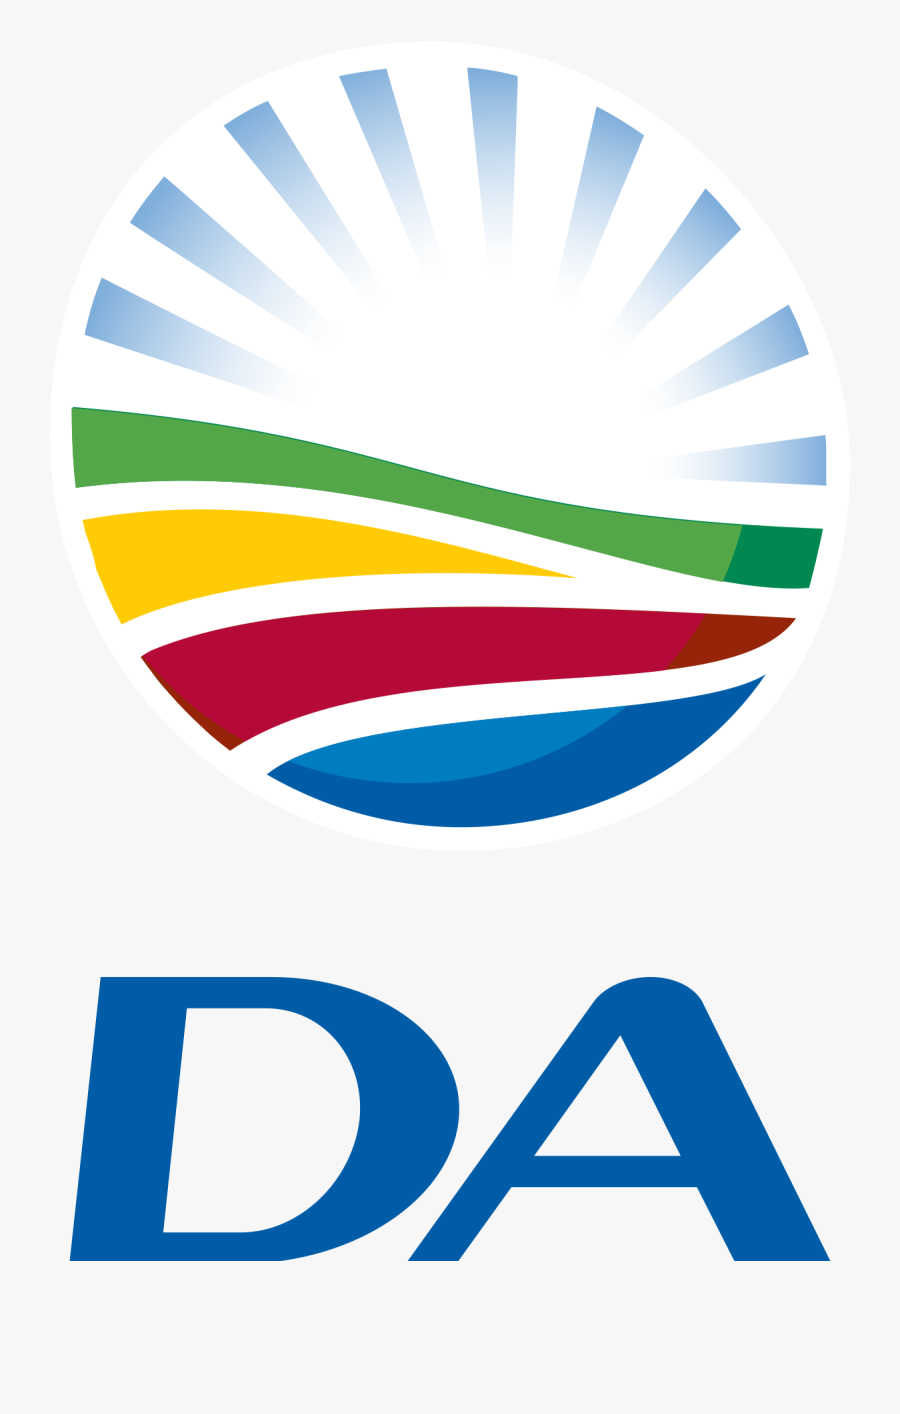 Democracy Clipart Class Vice President - Democratic Alliance South Africa, Transparent Clipart